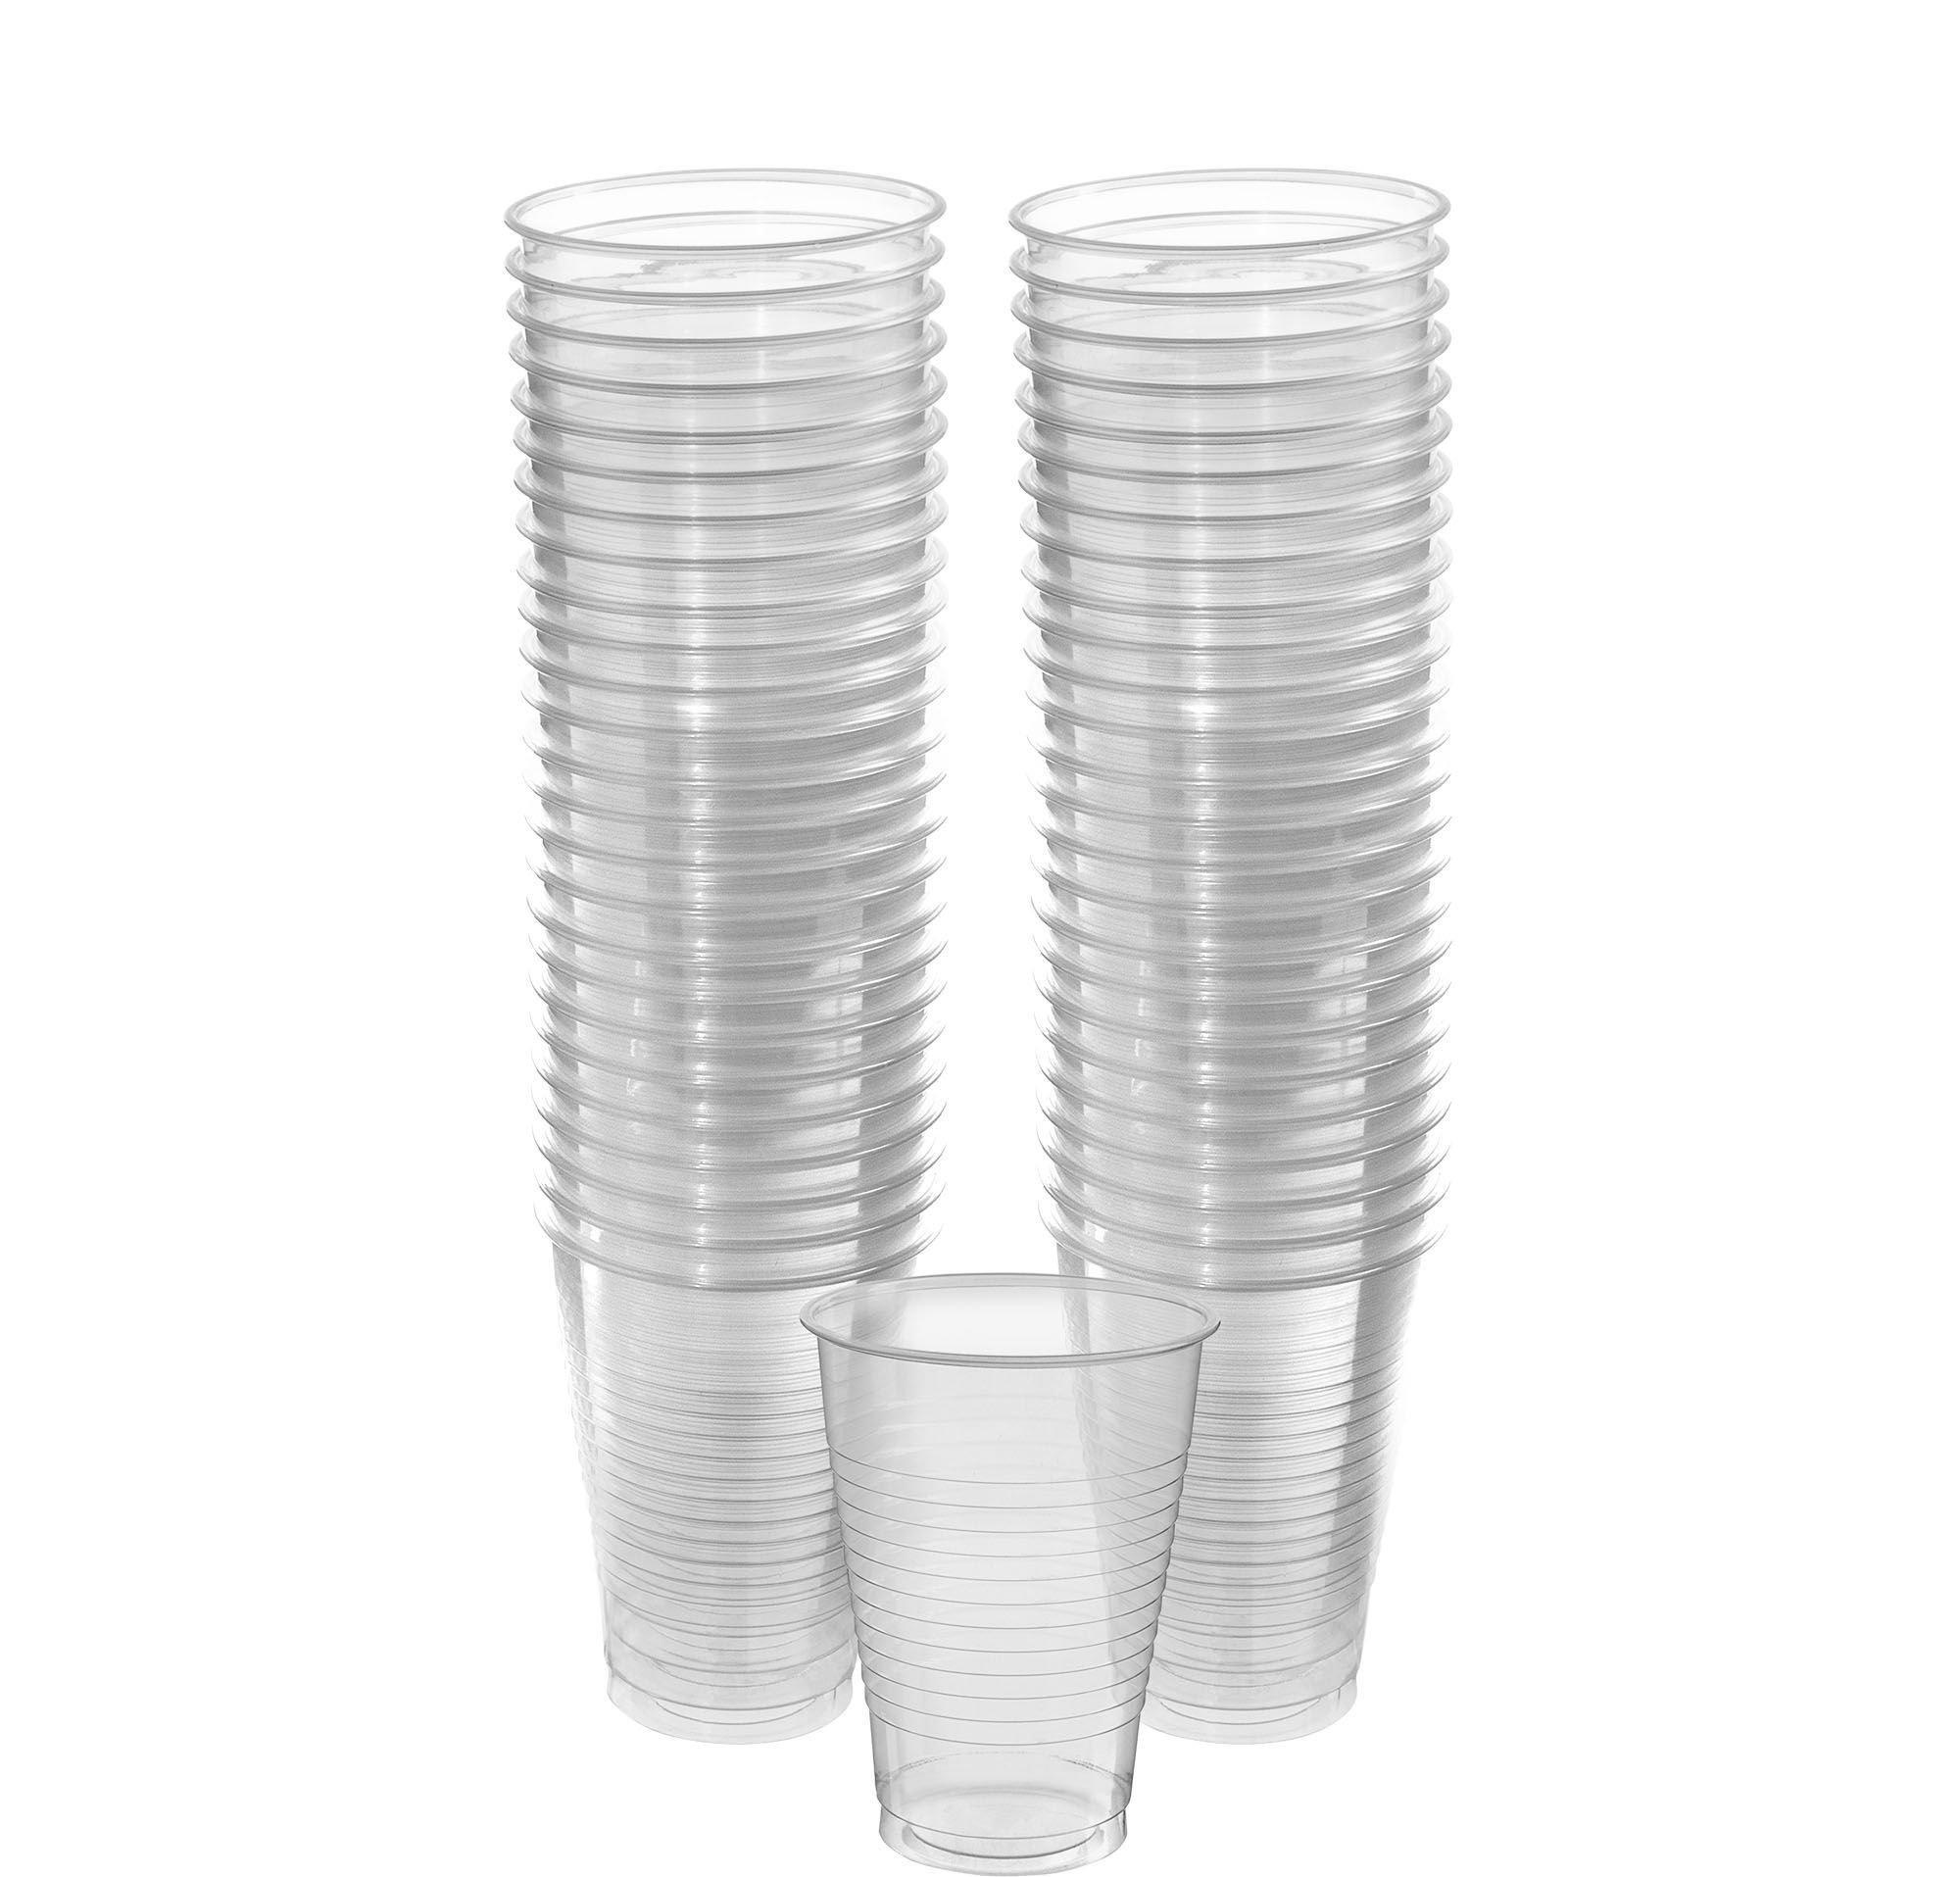 Clear Plastic Tableware Kit for 50 Guests